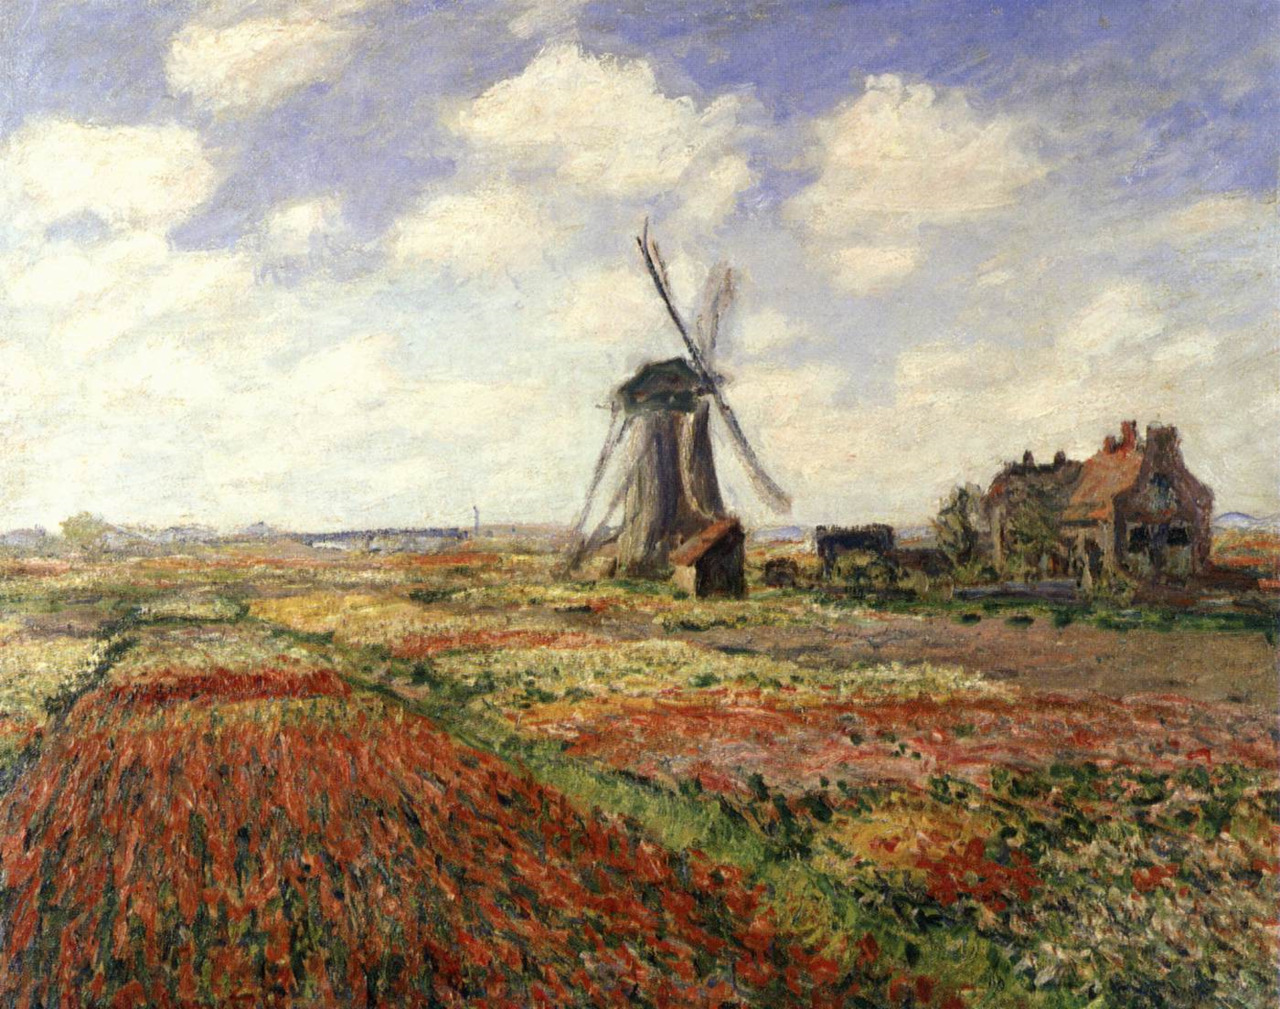 Claude #MONET, "TULIP FIELDS IN HOLLAND" 1886 #ilovemonet #art #artwit #twitart #iloveart #artist #holland #tulip https://t.co/3sFQZSOFFo